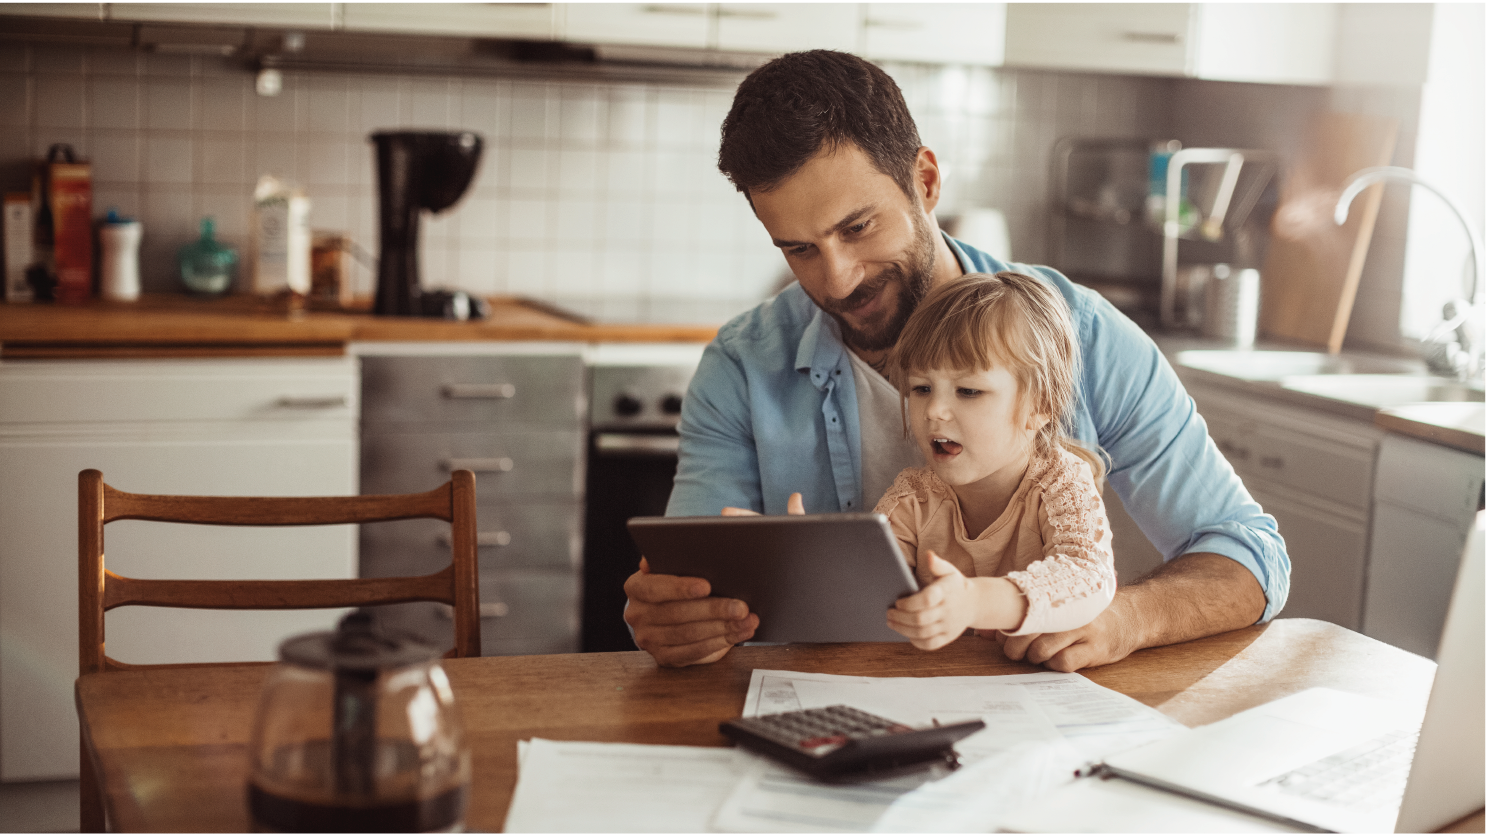 Dad on tablet and kitchen table with young daughter